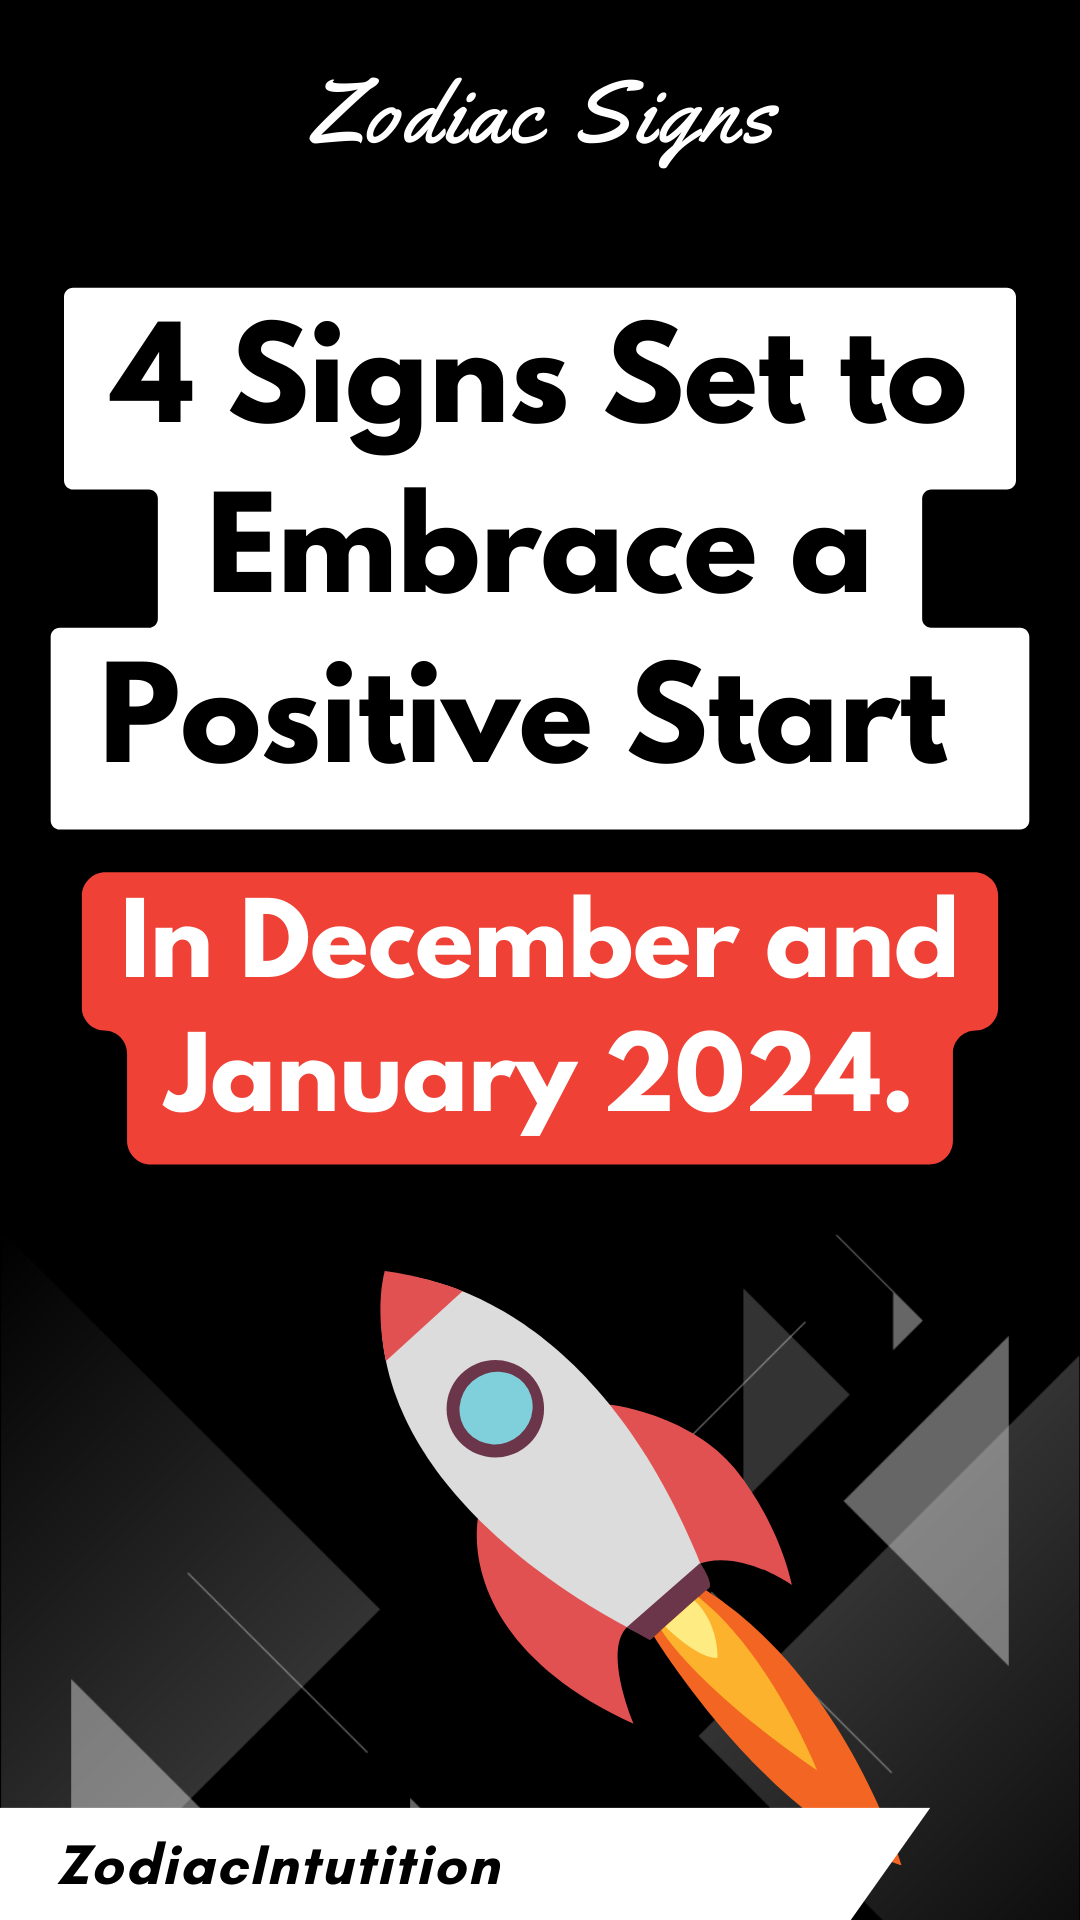 4 Signs Set to Embrace a Positive Start in December and January 2024.